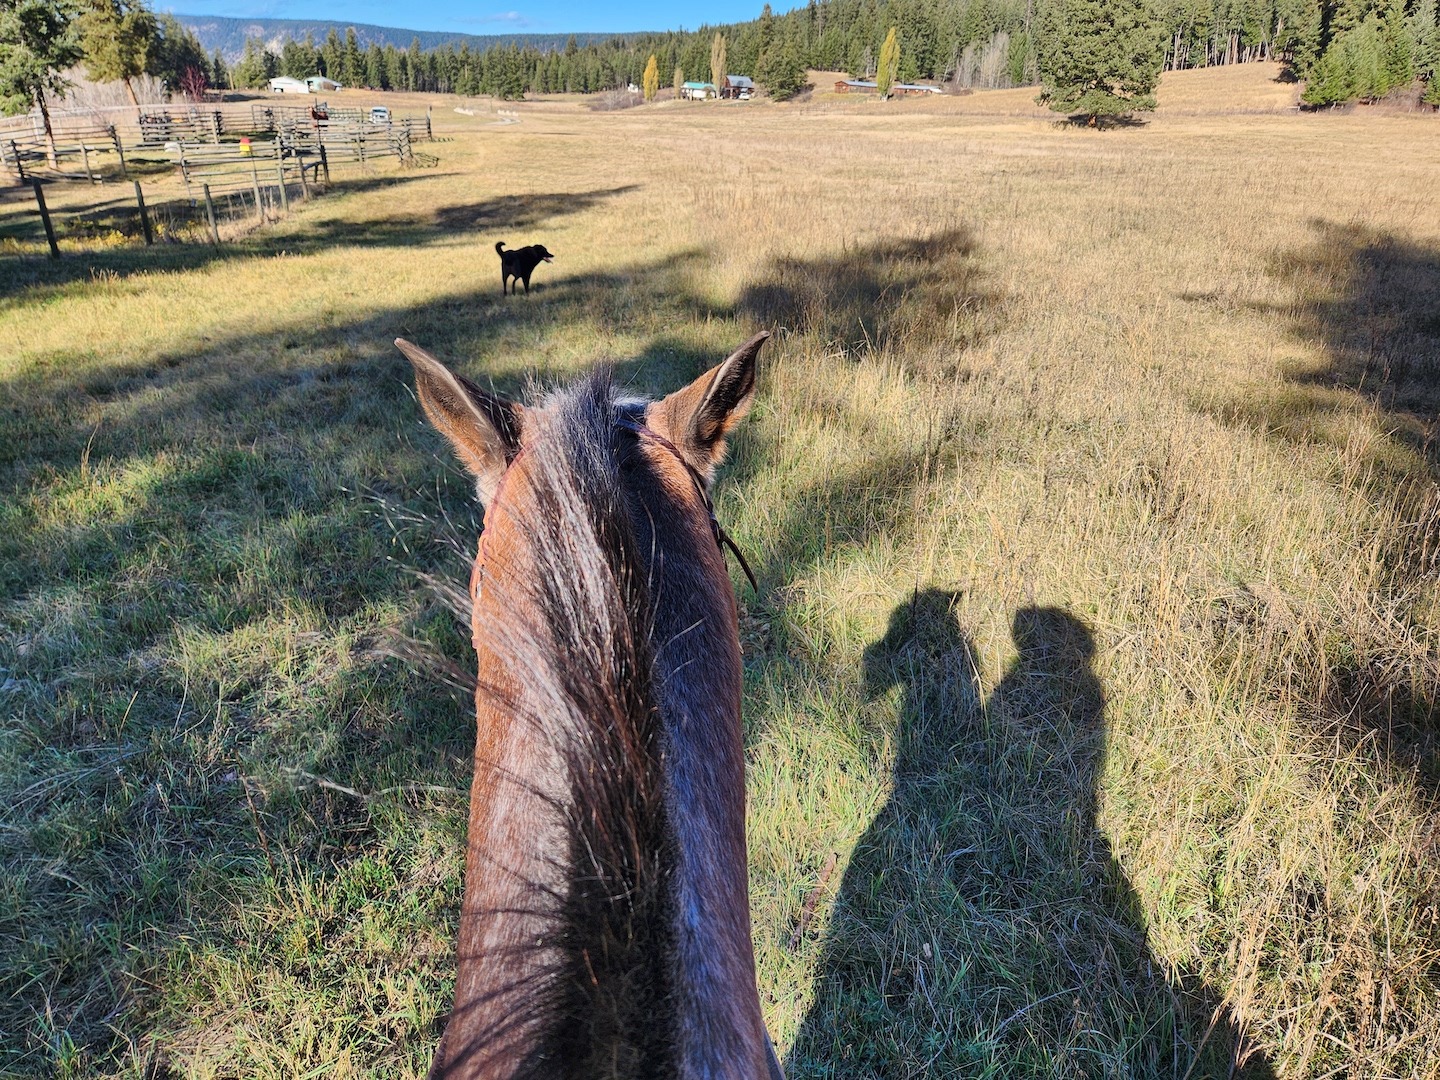 photo looking into a sunny field through a horse's ears, the rider's shadow to the forward right, a black dog in the distance up ahead